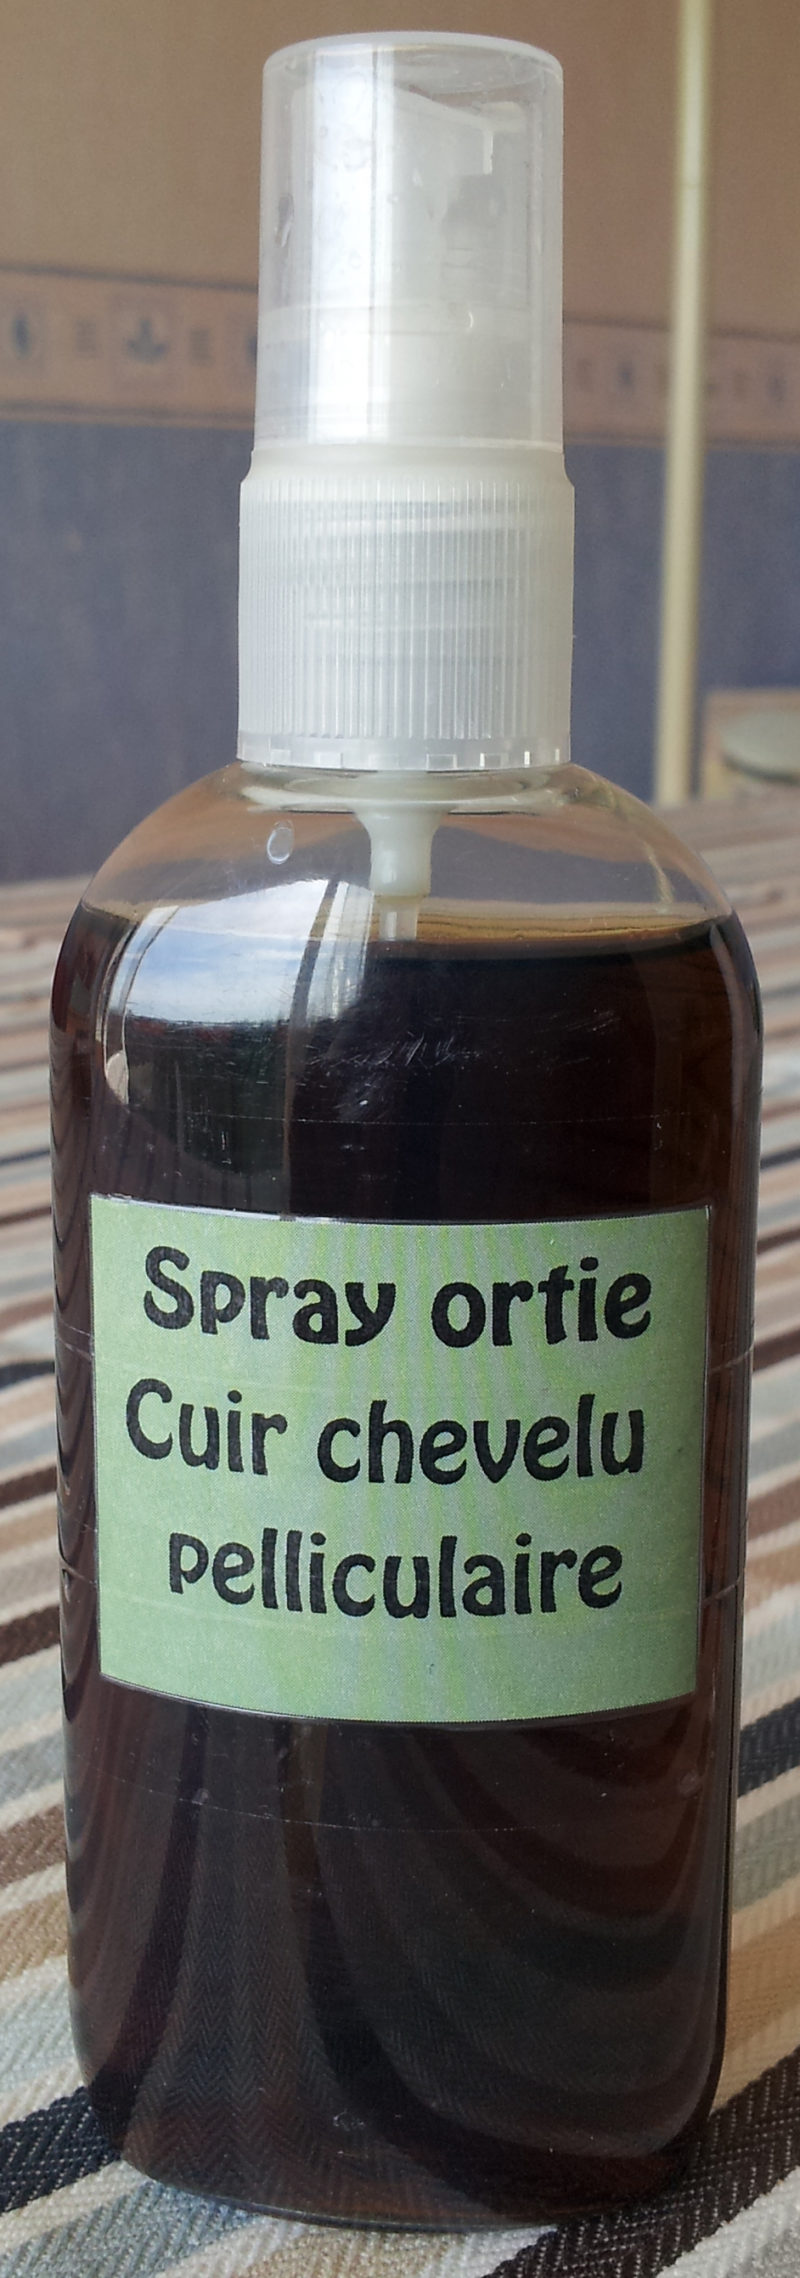 Macerat-poudre_ortie-soin-cheveux-fortifiant_naturel-homemade-lalo-cosmeto (1)